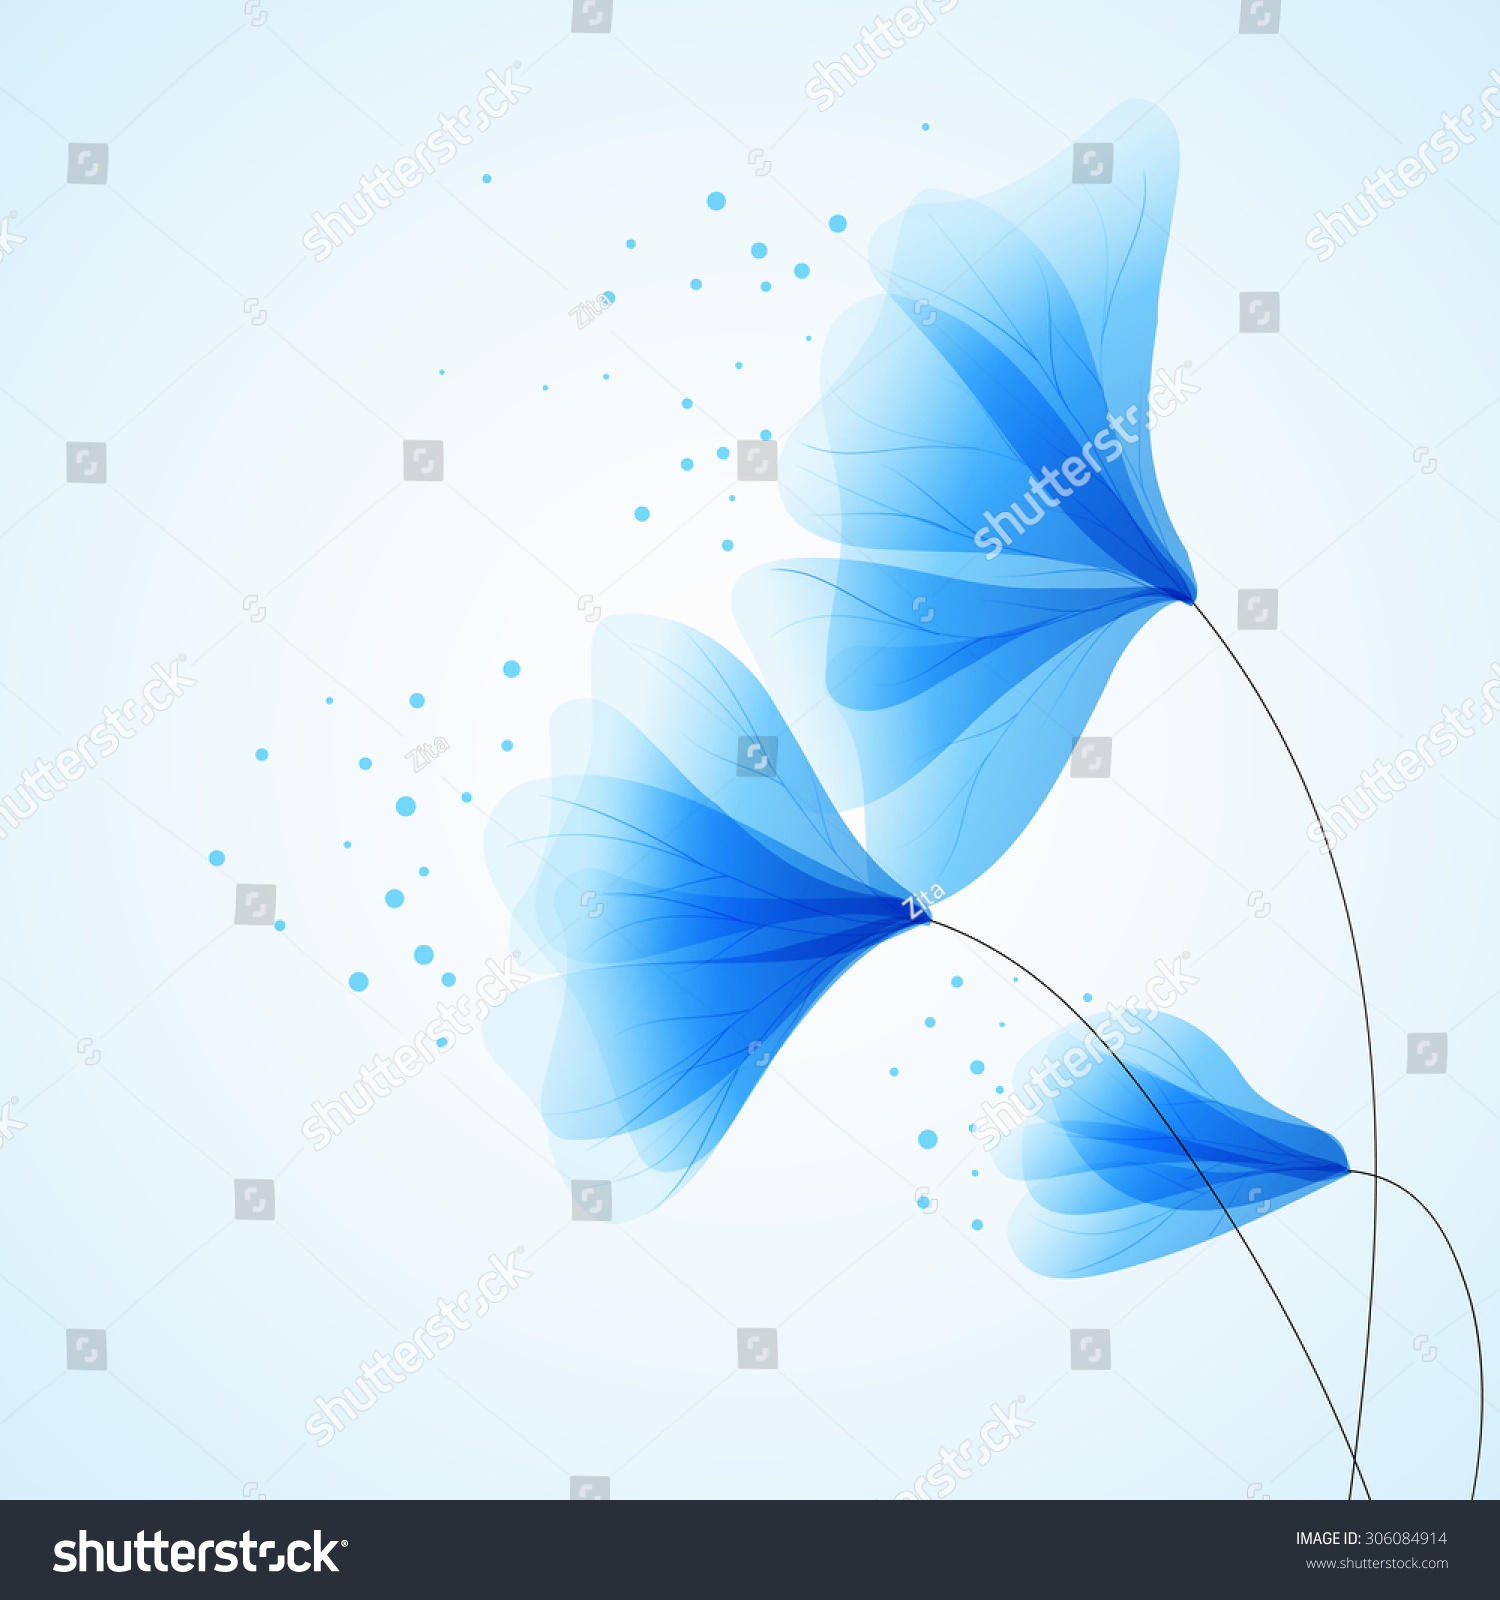 SVG of Business  template or cover with blue semitransparent flowers - vector illustration  svg